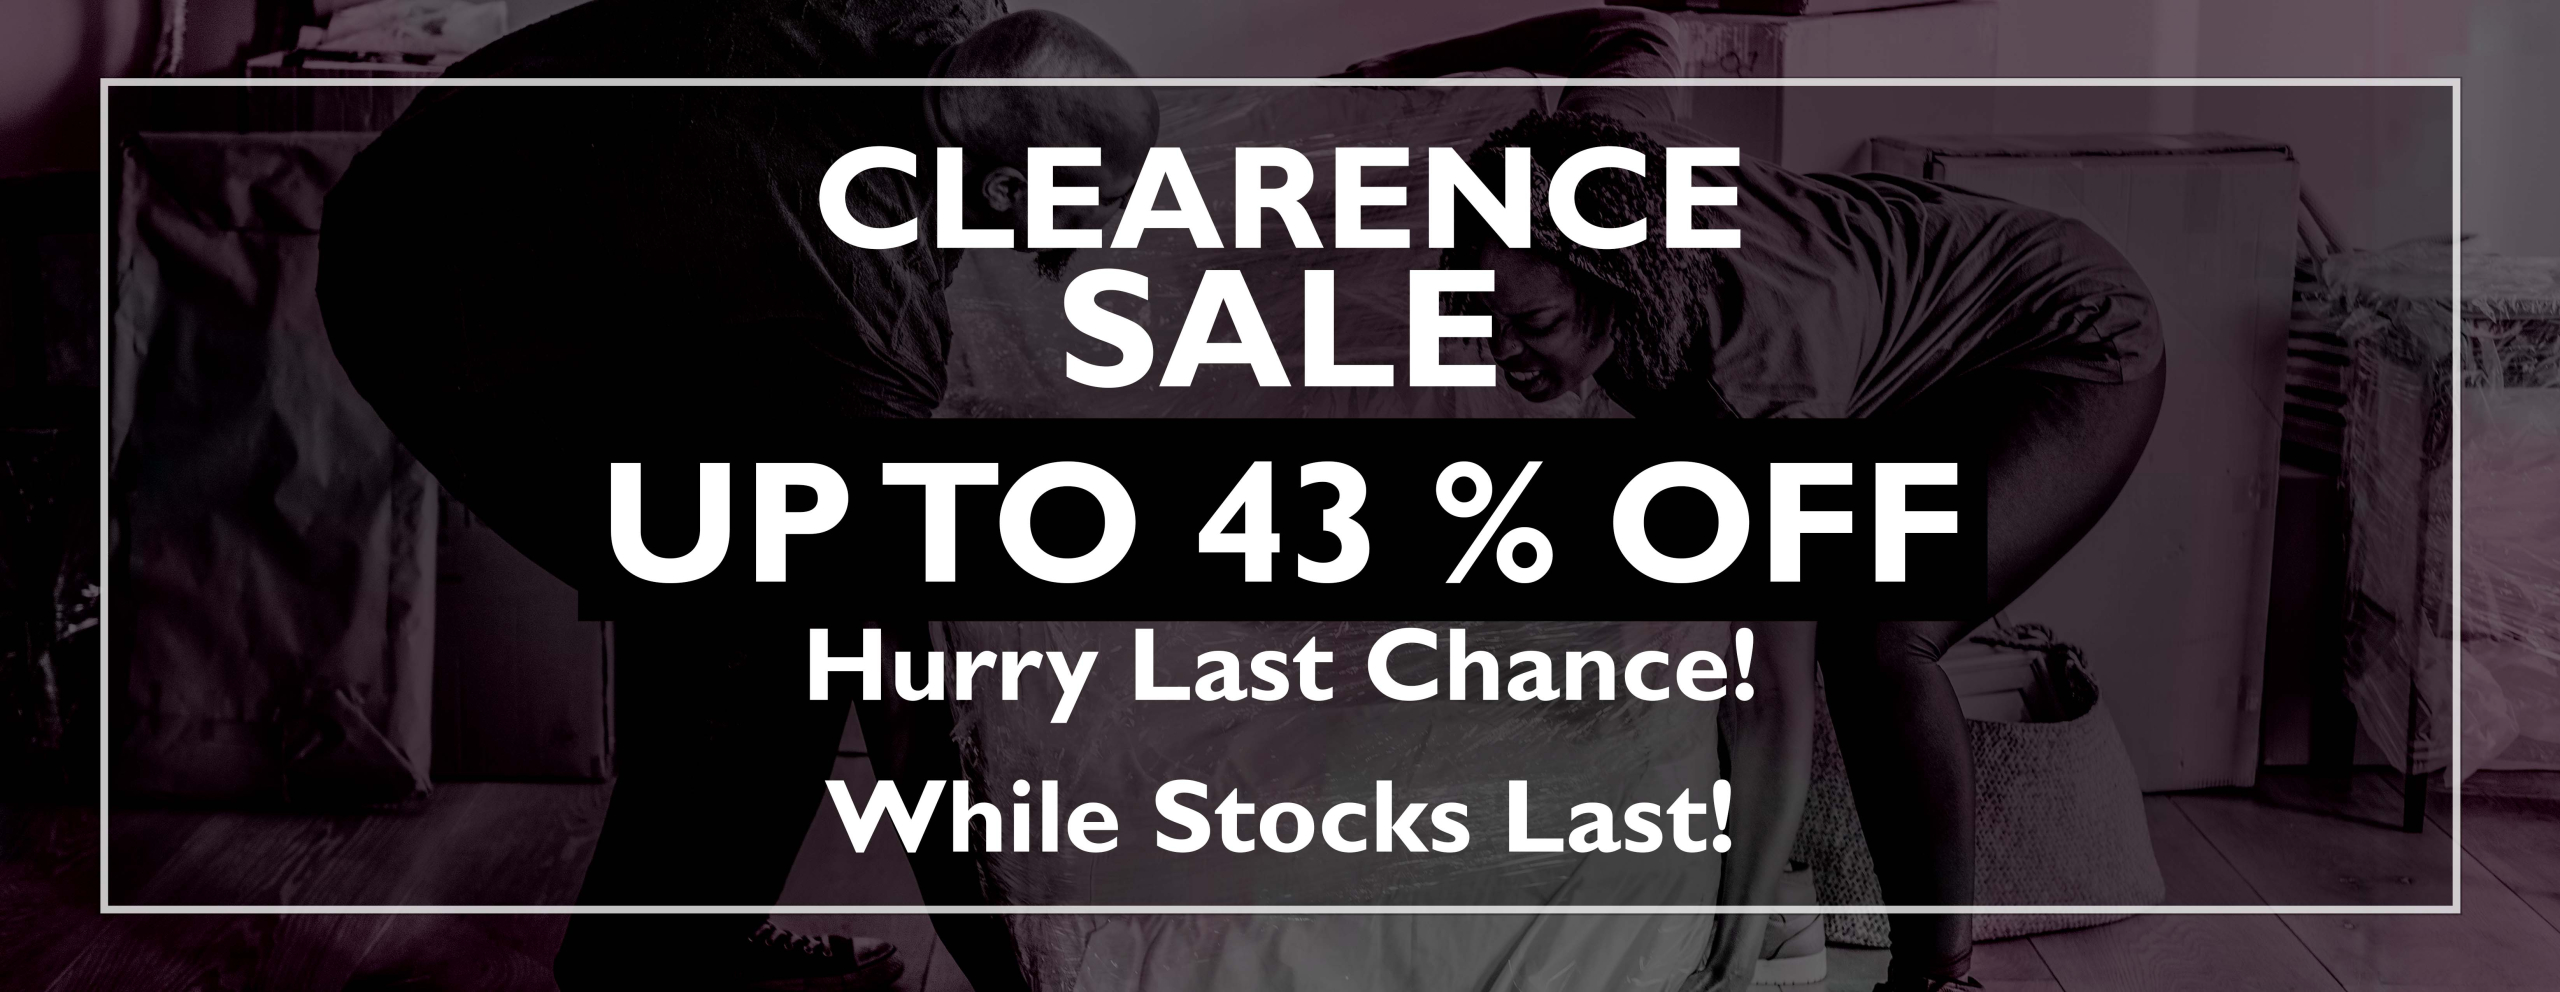 clearnce_sale_banner_website